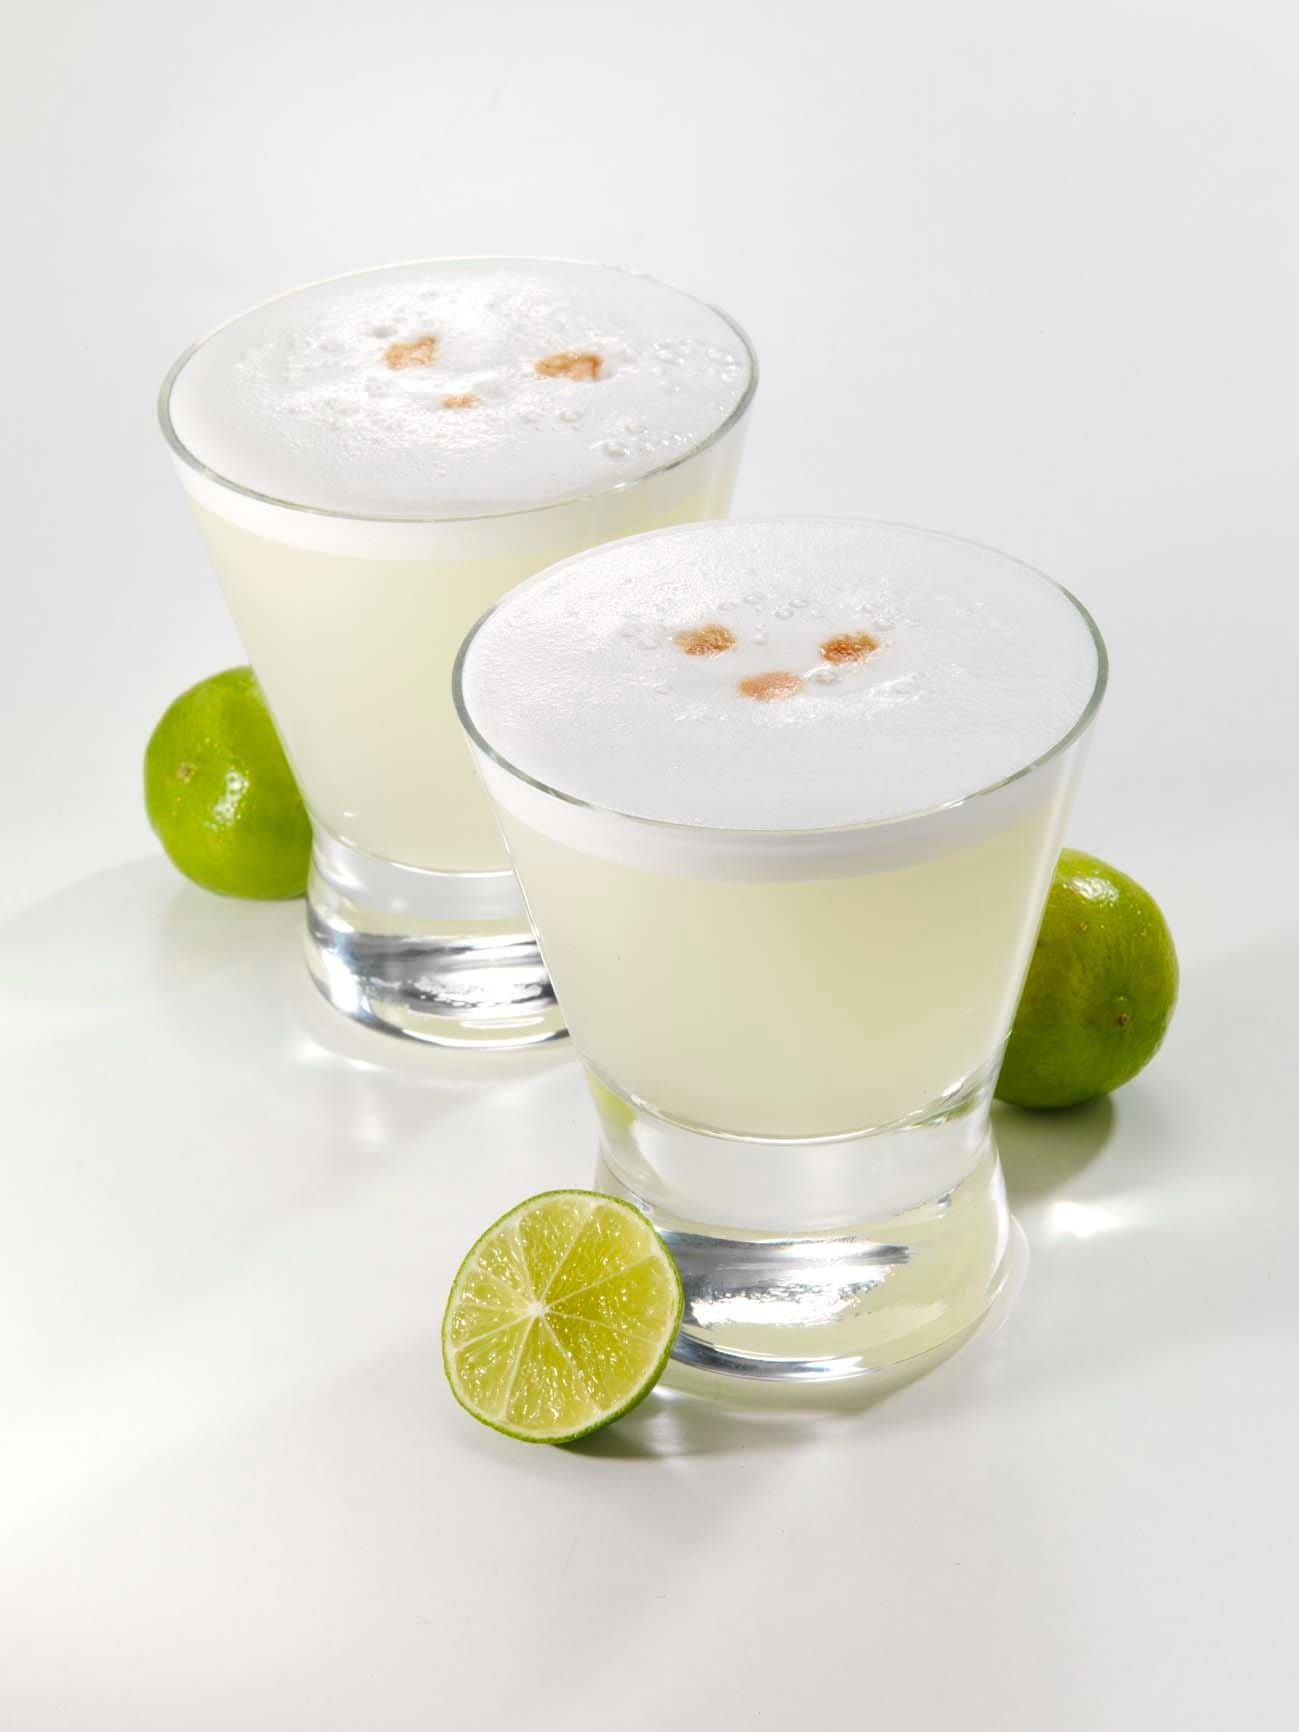 Pisco Sour Cocktail Friday. Ingredients: | by Carnaval Del Sol | Medium